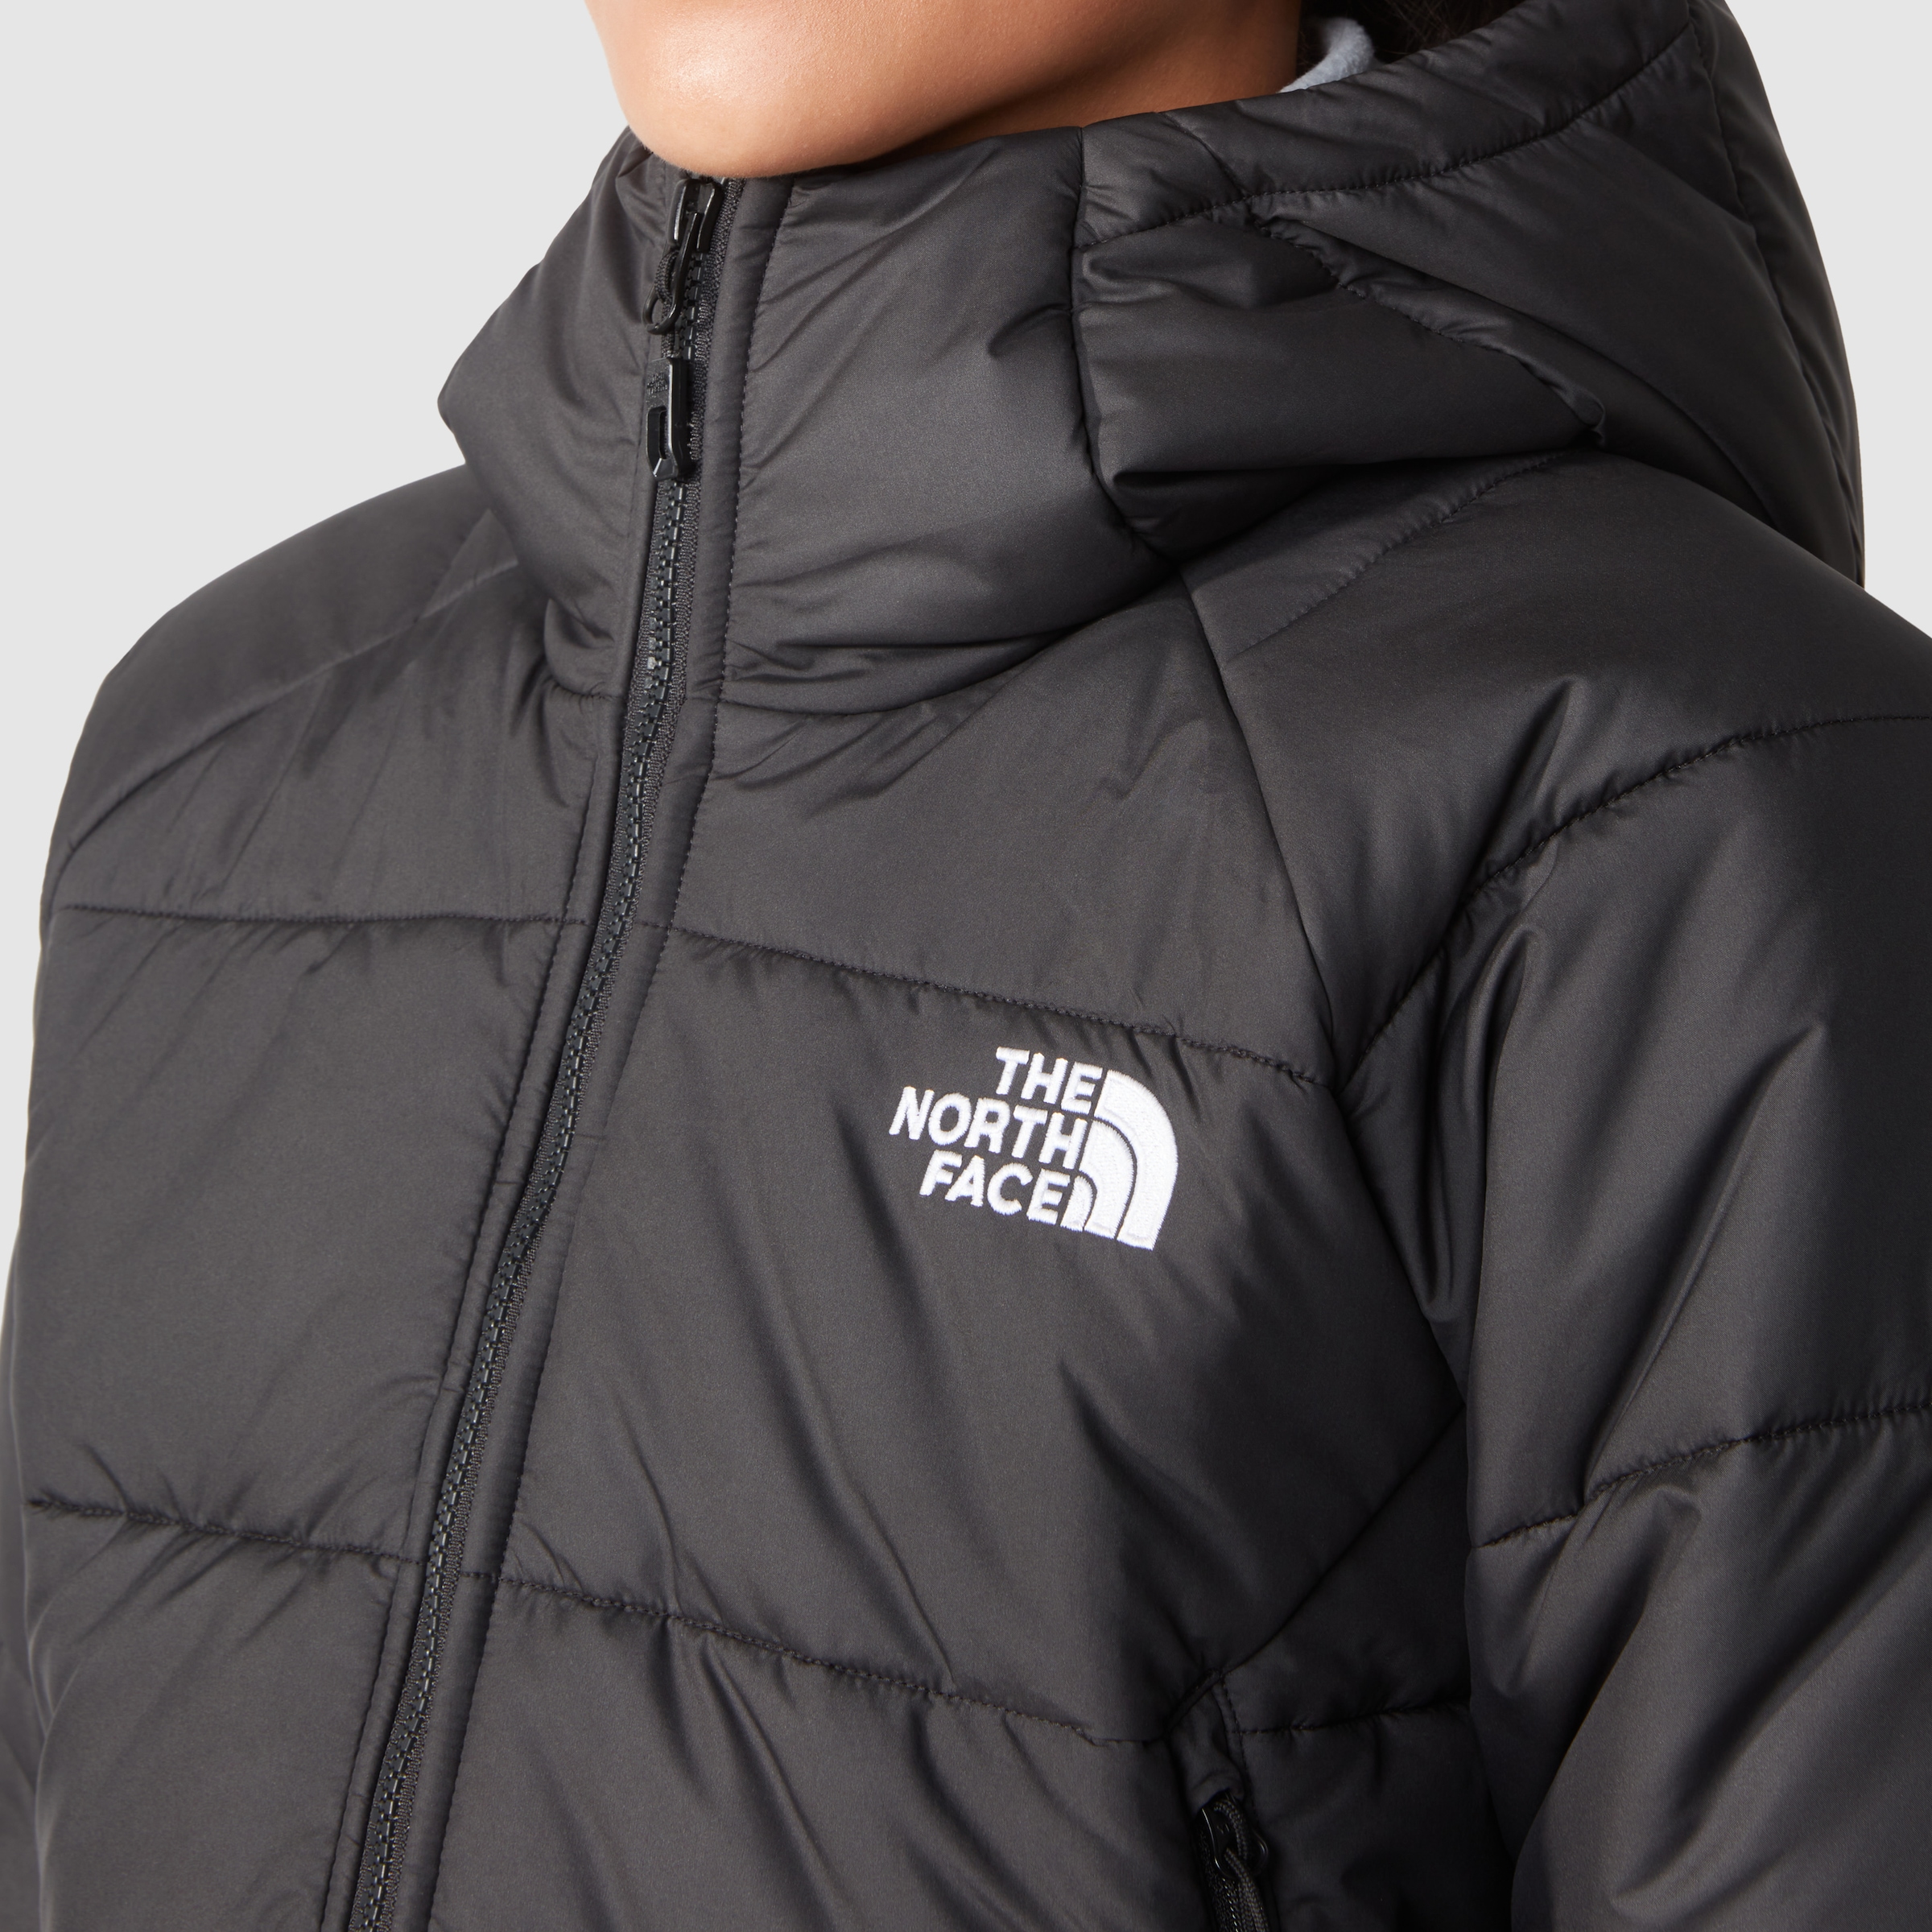 HOODIE«, North Face | mit Funktionsjacke Kapuze, »W HYALITE Logodruck The BAUR mit SYNTHETIC